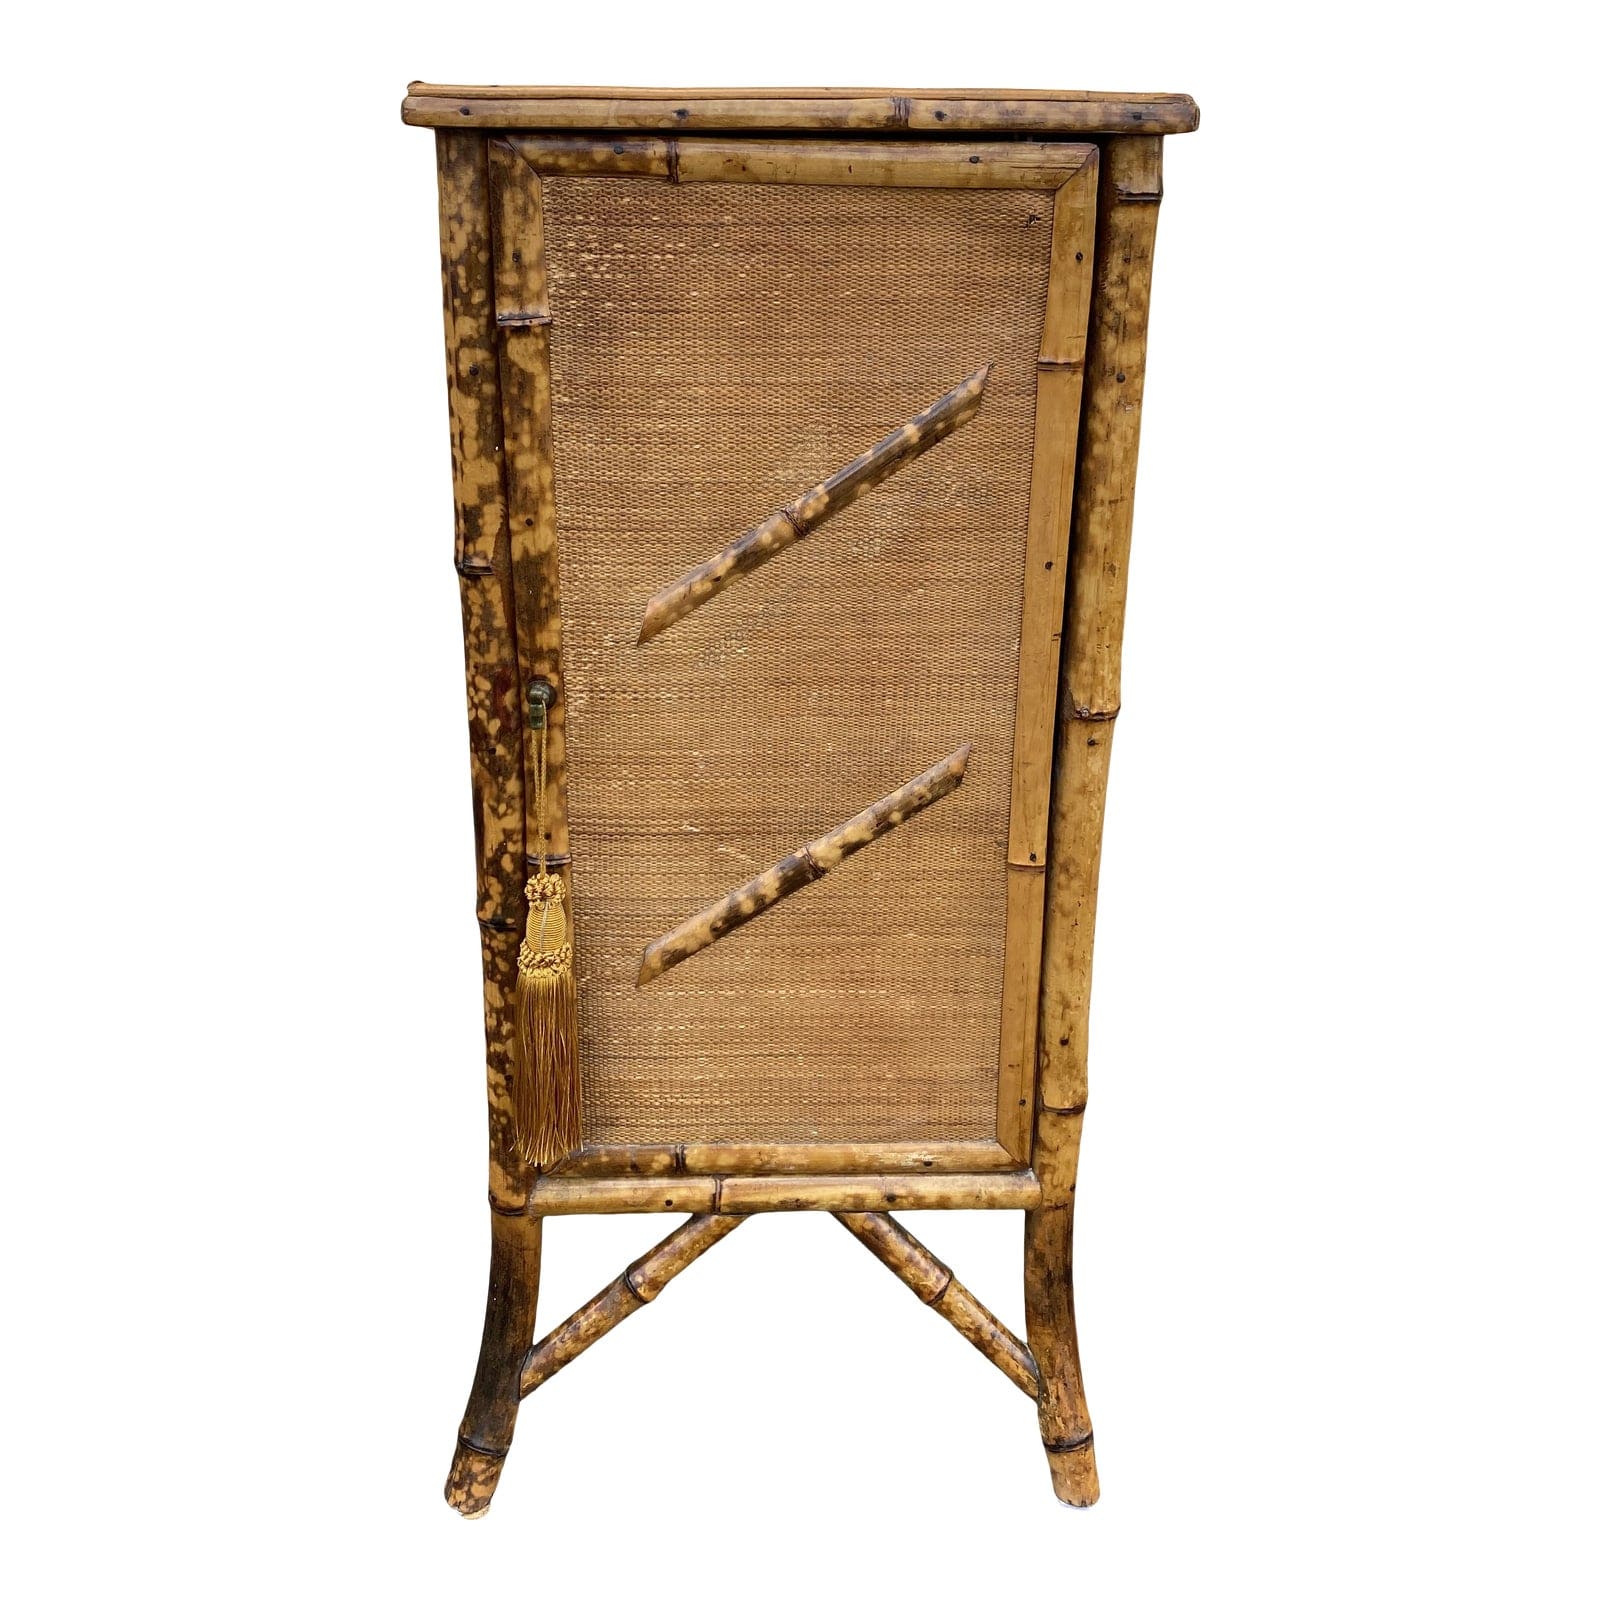 Chairish vintage bamboo cabinet - vintage - bamboo - bamboo furniture - living room decor - brilliant 